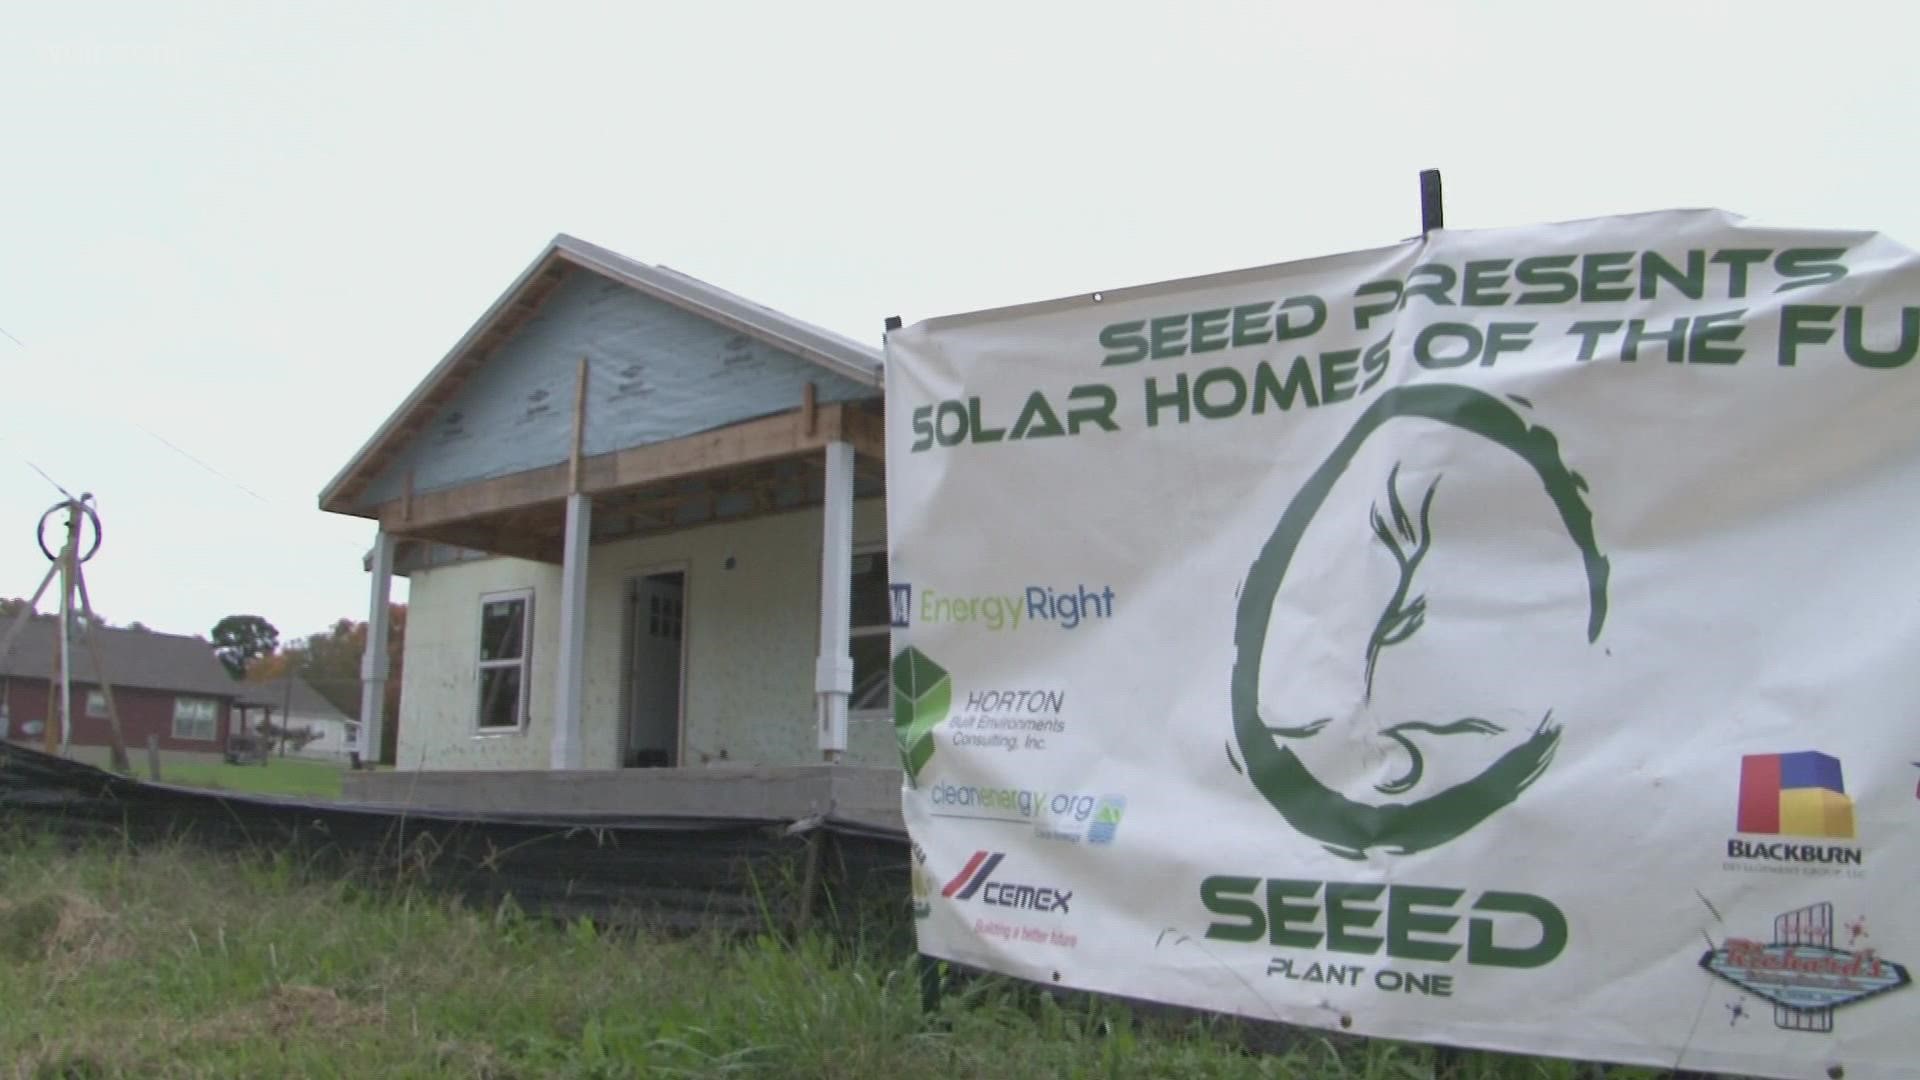 Off Texas Avenue, a new solar home is nearing completion. It was built by young adults in the SEEED organization.